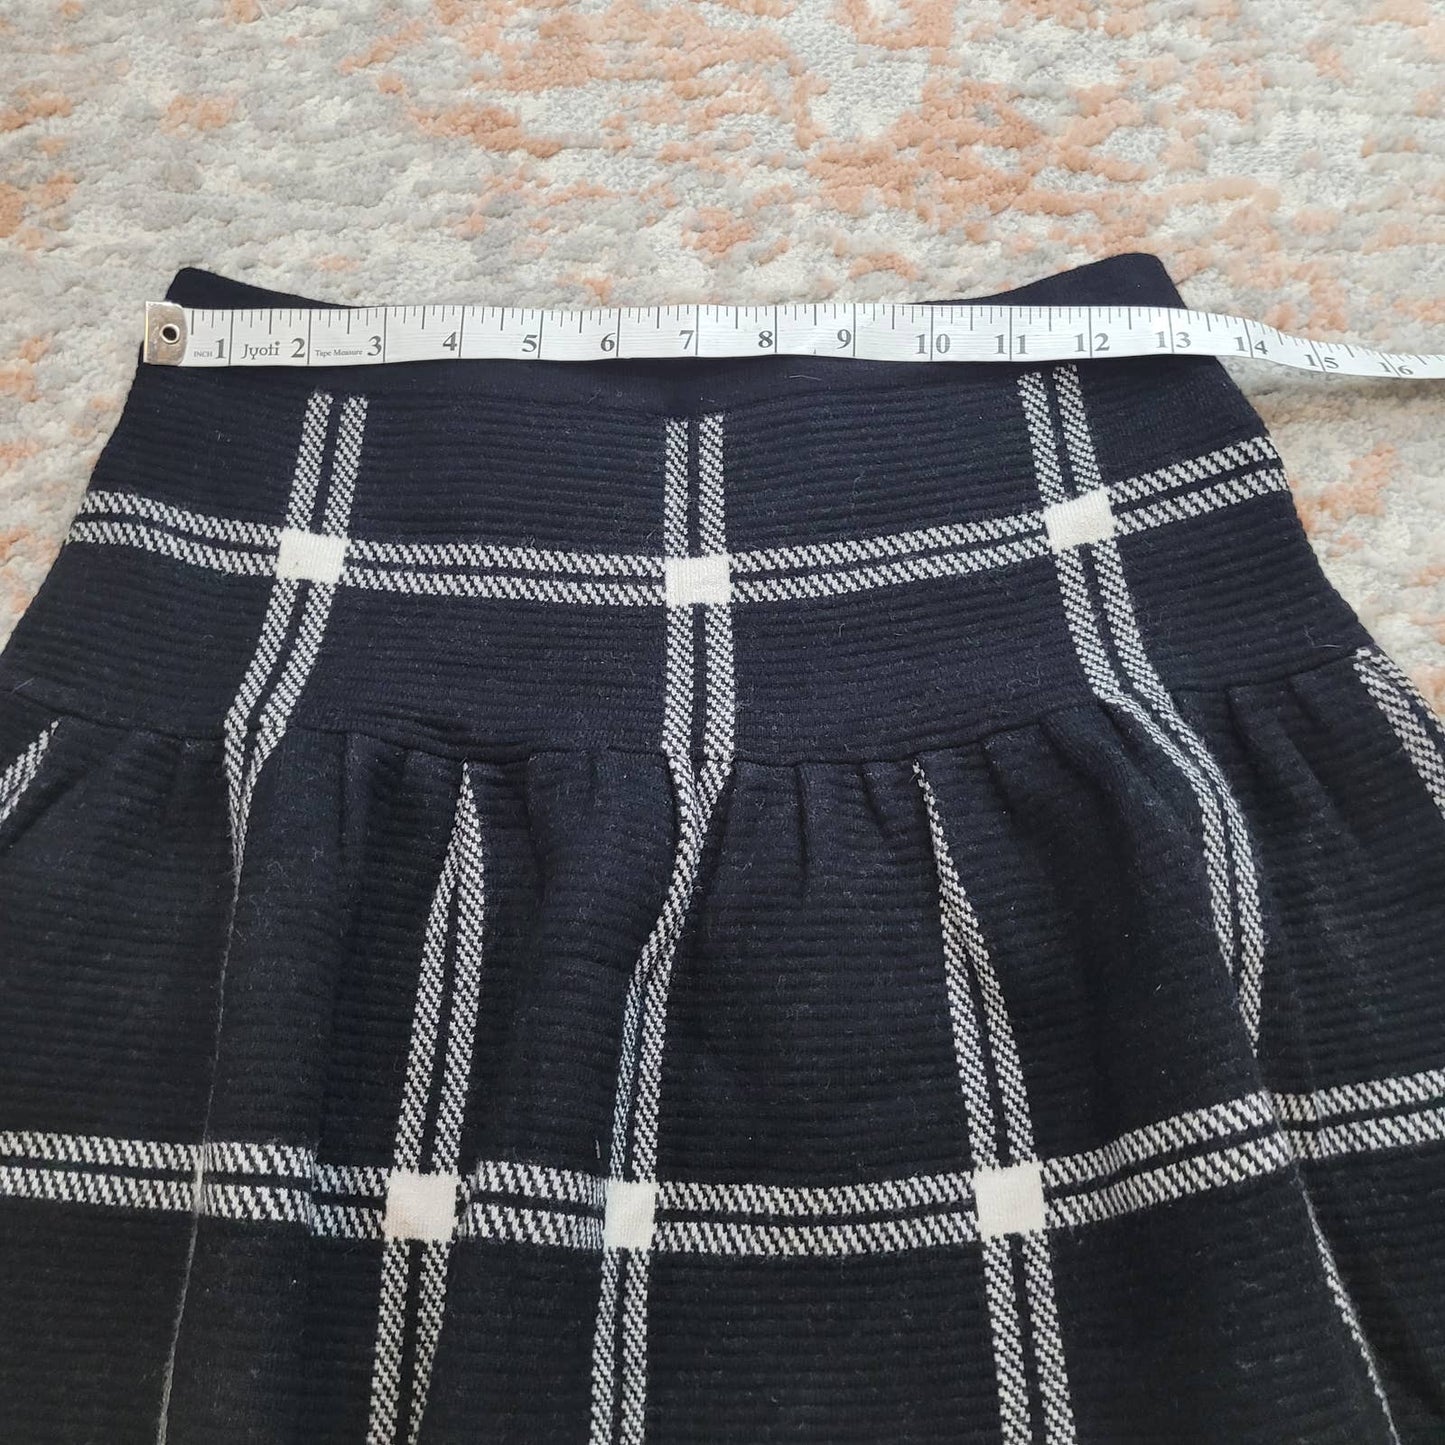 Cynthia Rowley Wool Blend Check Pleated Skirt - Size Small